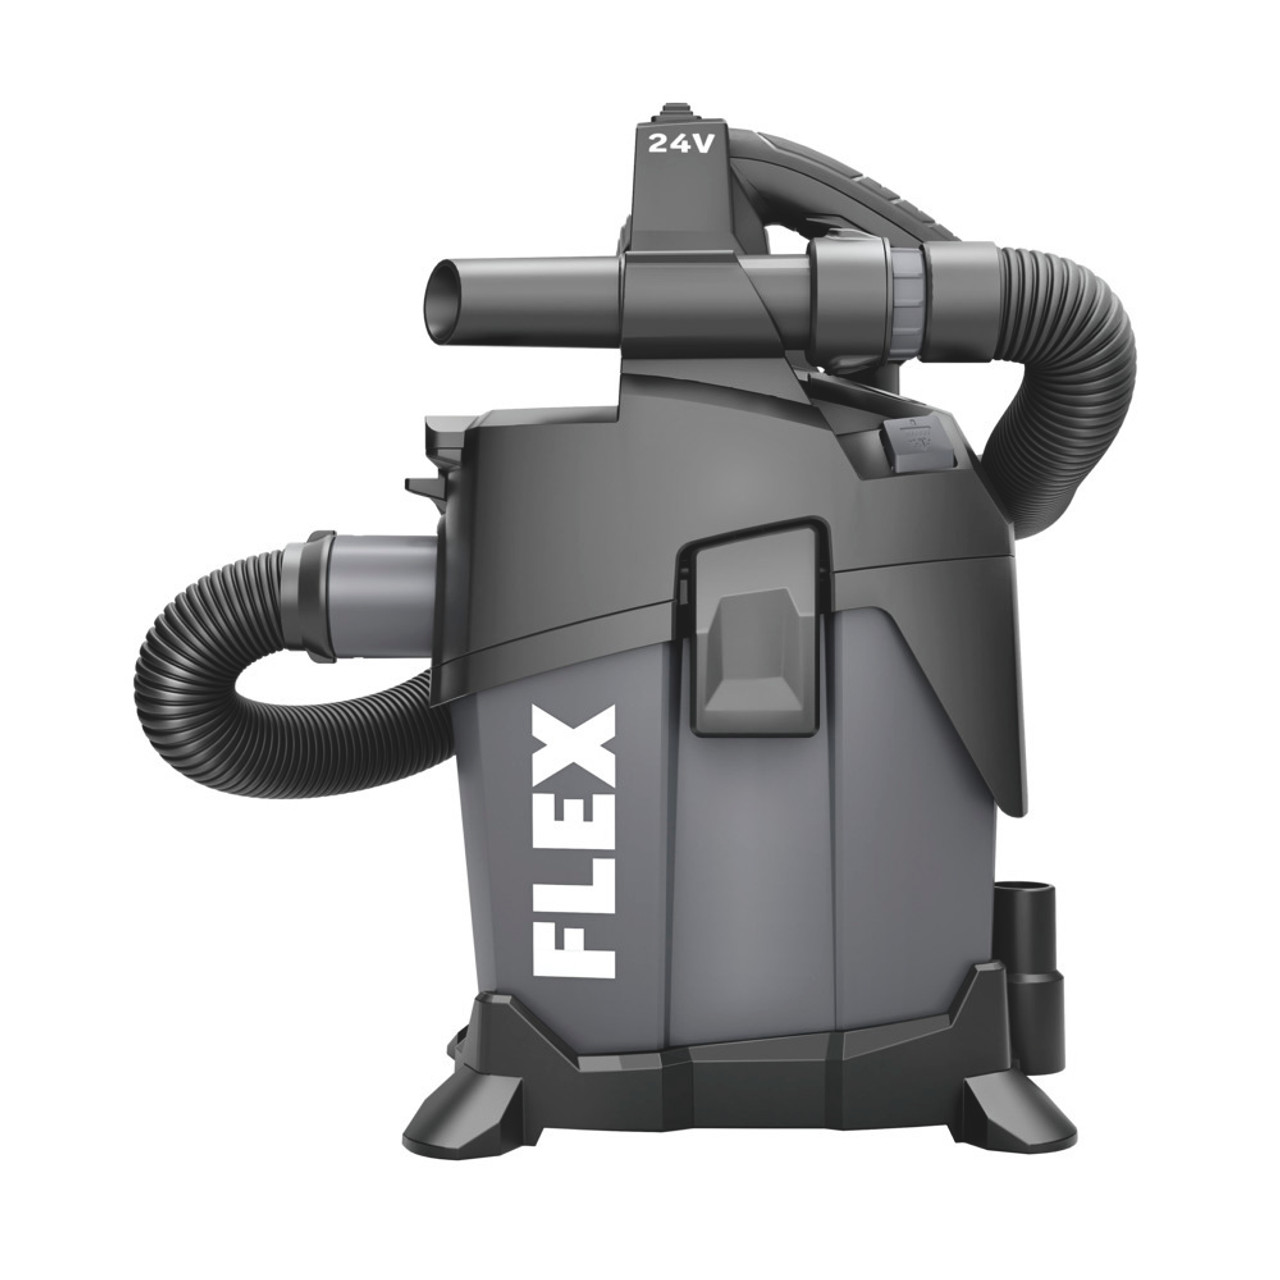 1.6 GALLON WET/DRY VACUUM (Tool Only) by FLEX